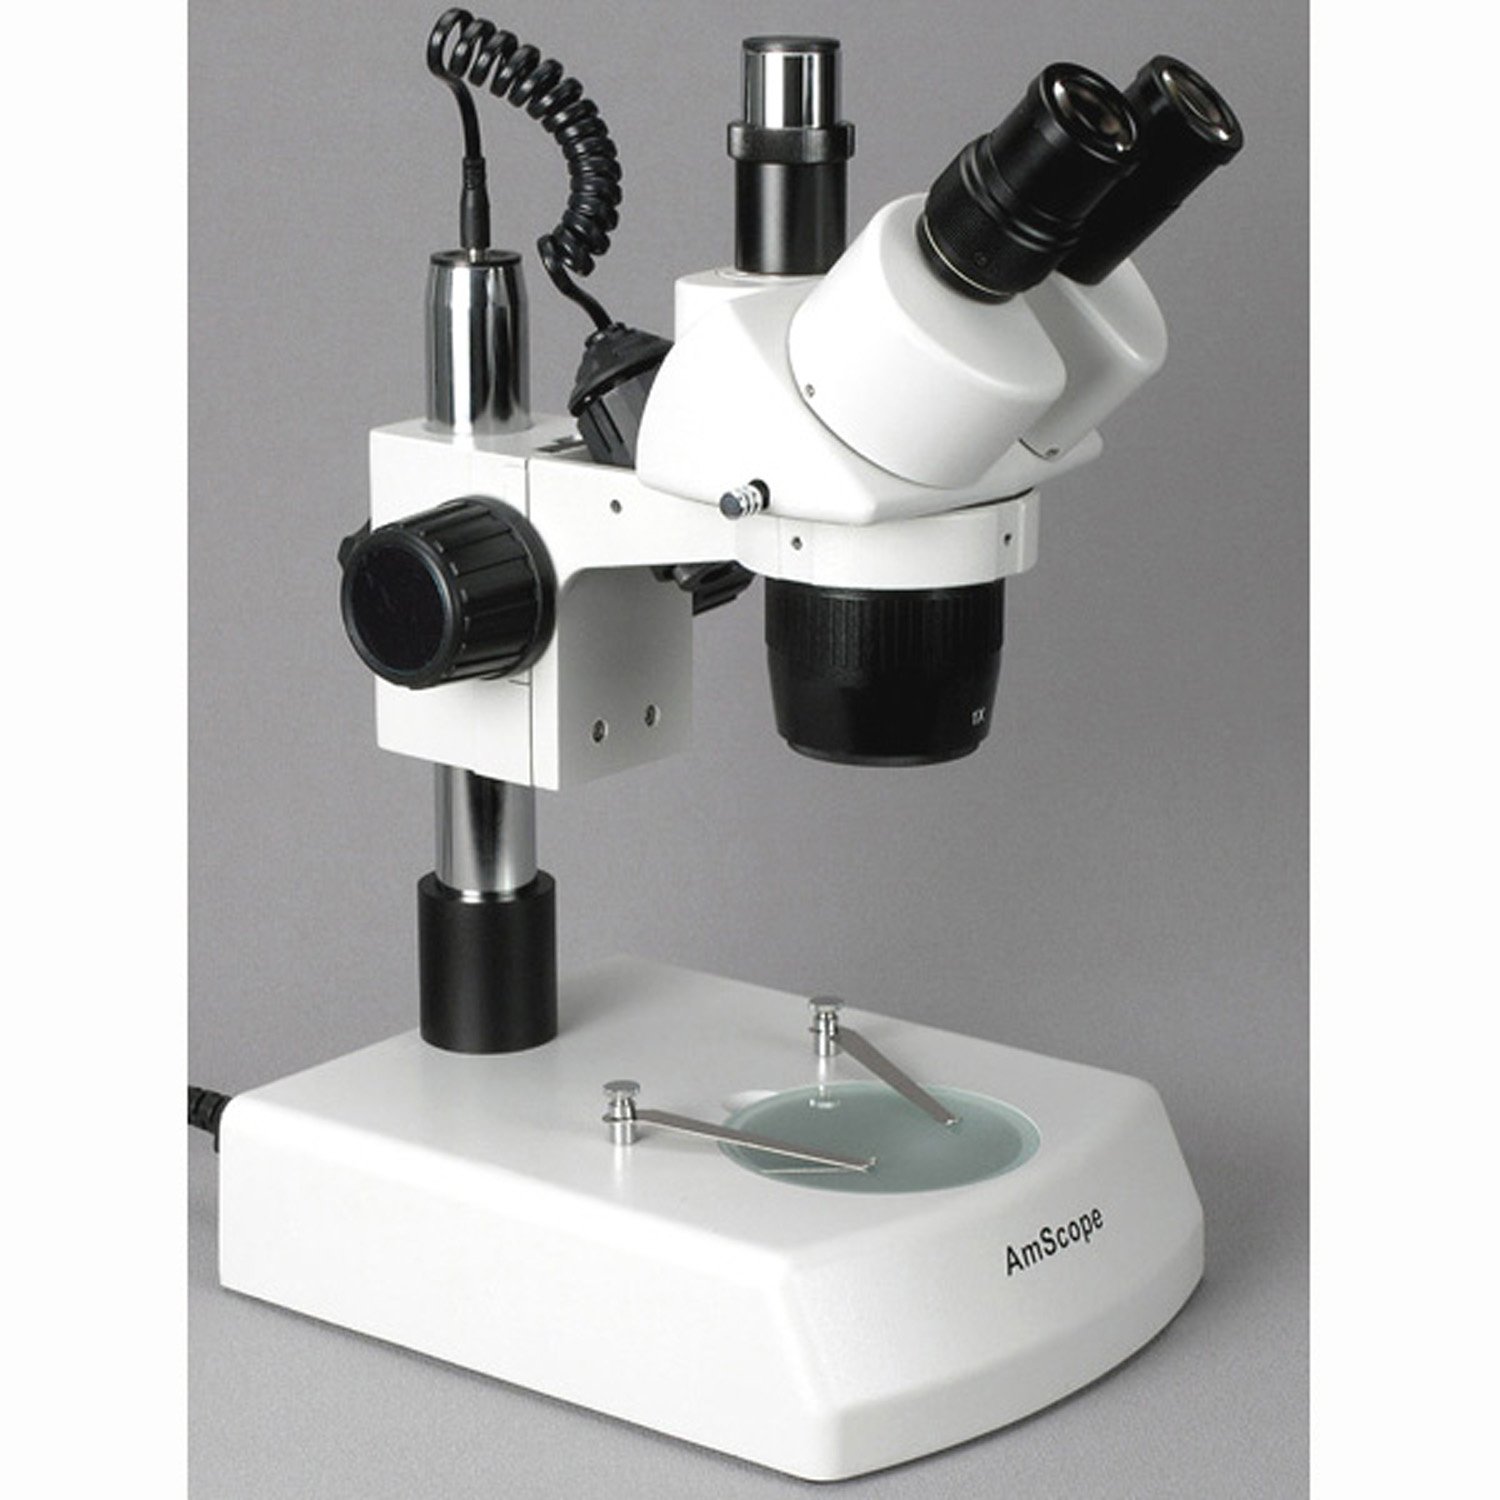 AmScope SW-2T24X Trinocular Stereo Microscope, WH10x Eyepieces, 10X/20X/40X Magnification, 2X/4X Objective, Upper and Lower Halogen Lighting, Pillar Stand, 110V-120V, Includes 0.5x Barlow Lens